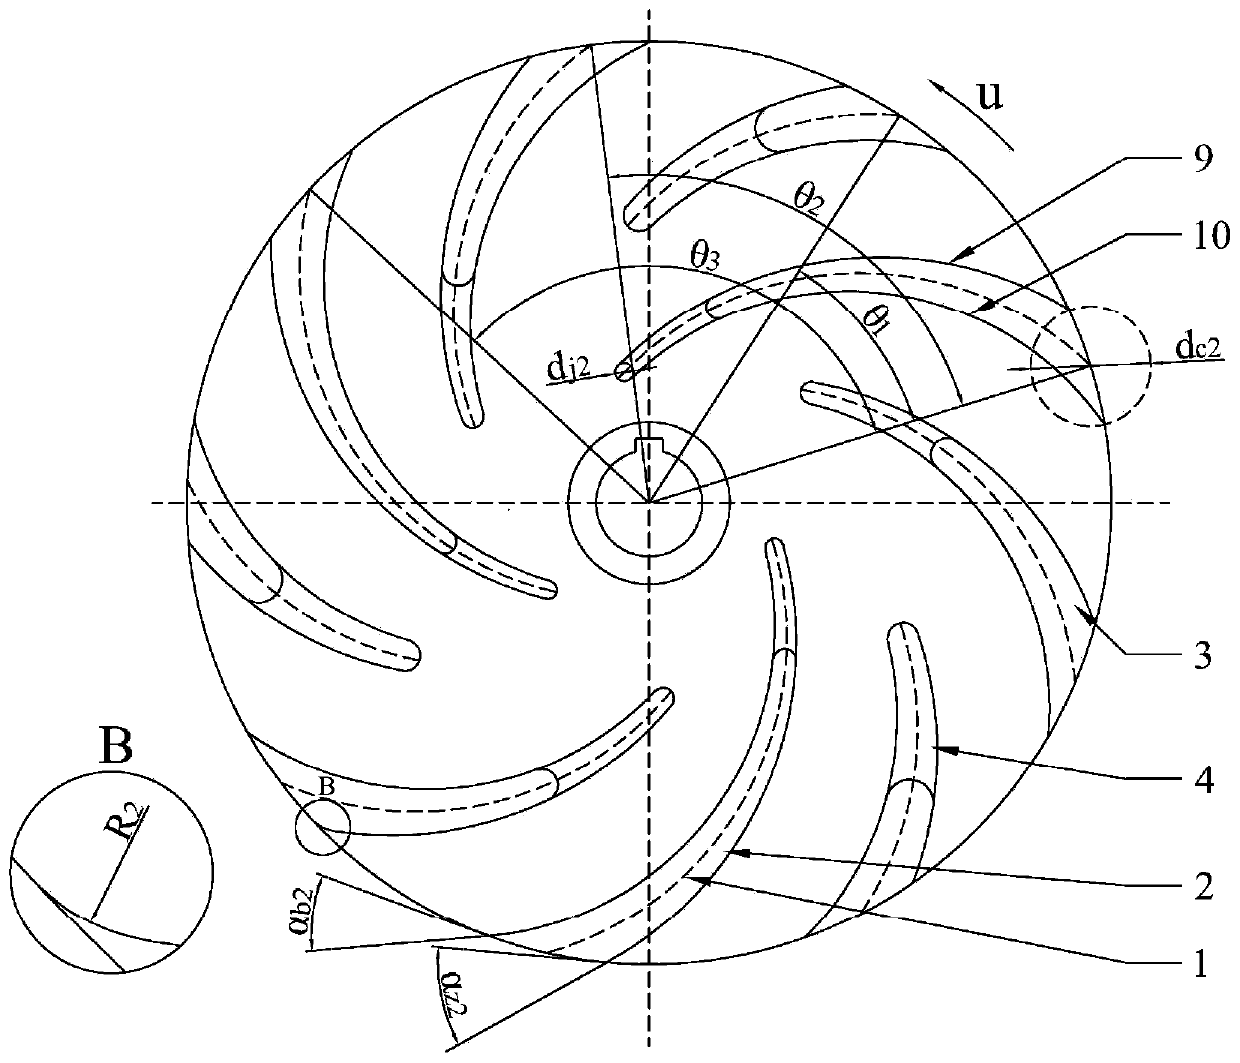 A semi-open centrifugal pump impeller and its optimal design method